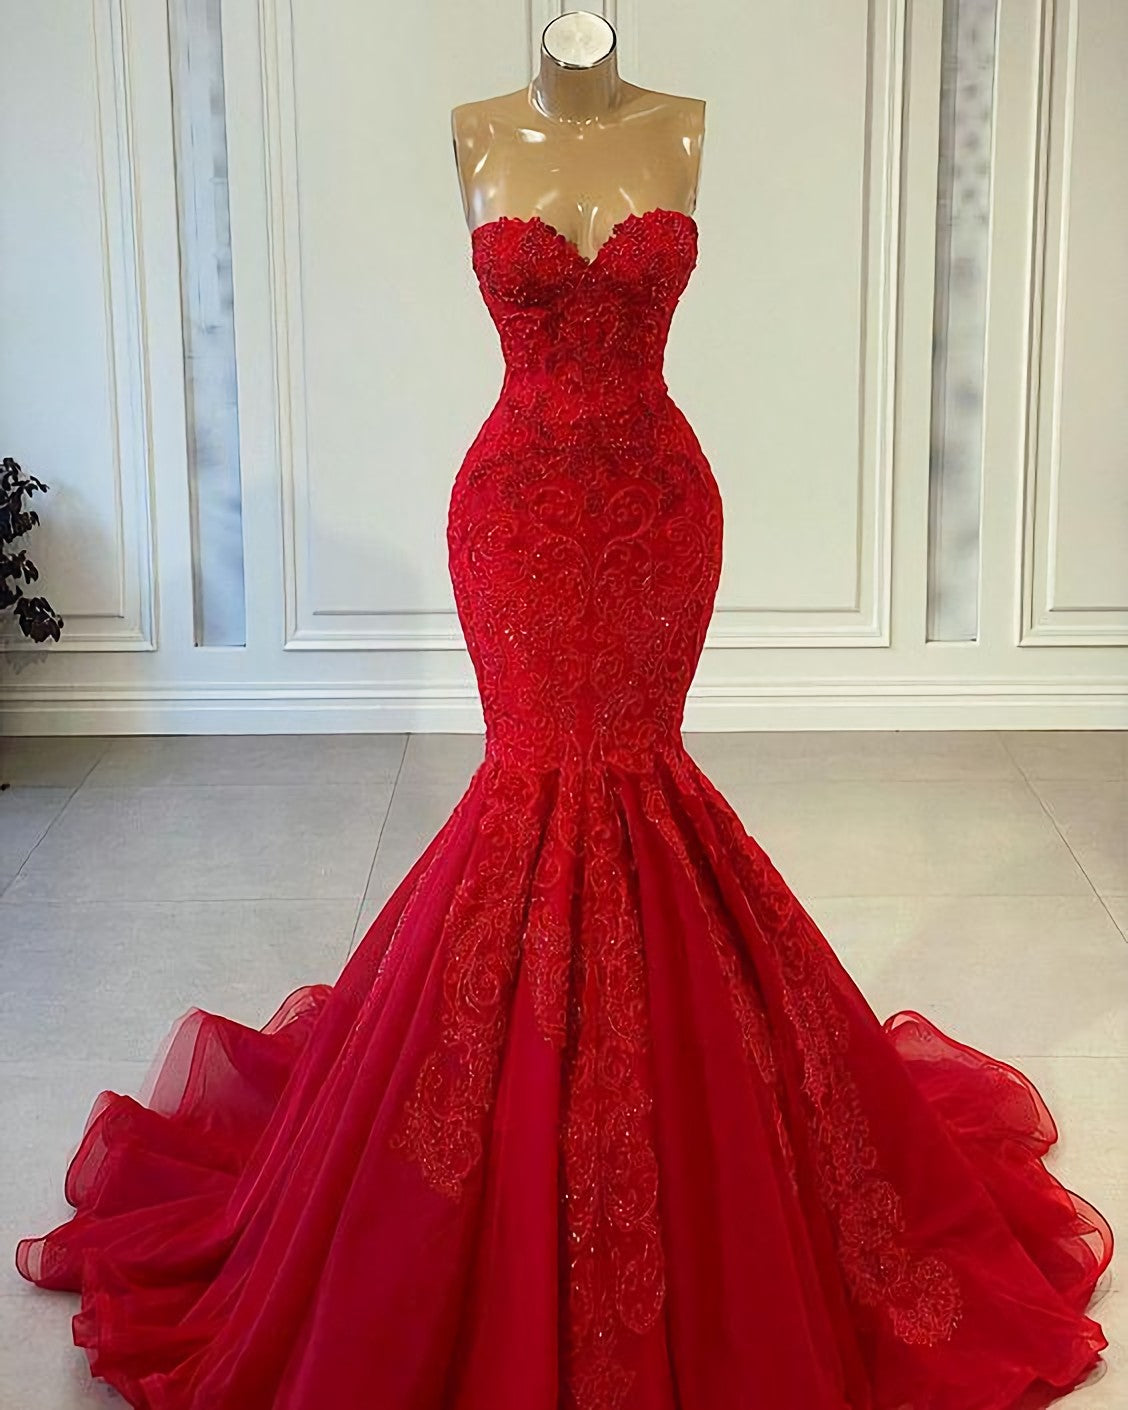 Party Dress Formal, Prom Dresses, Lace Prom Dresses, Red Prom Dresses, Evening Dresses